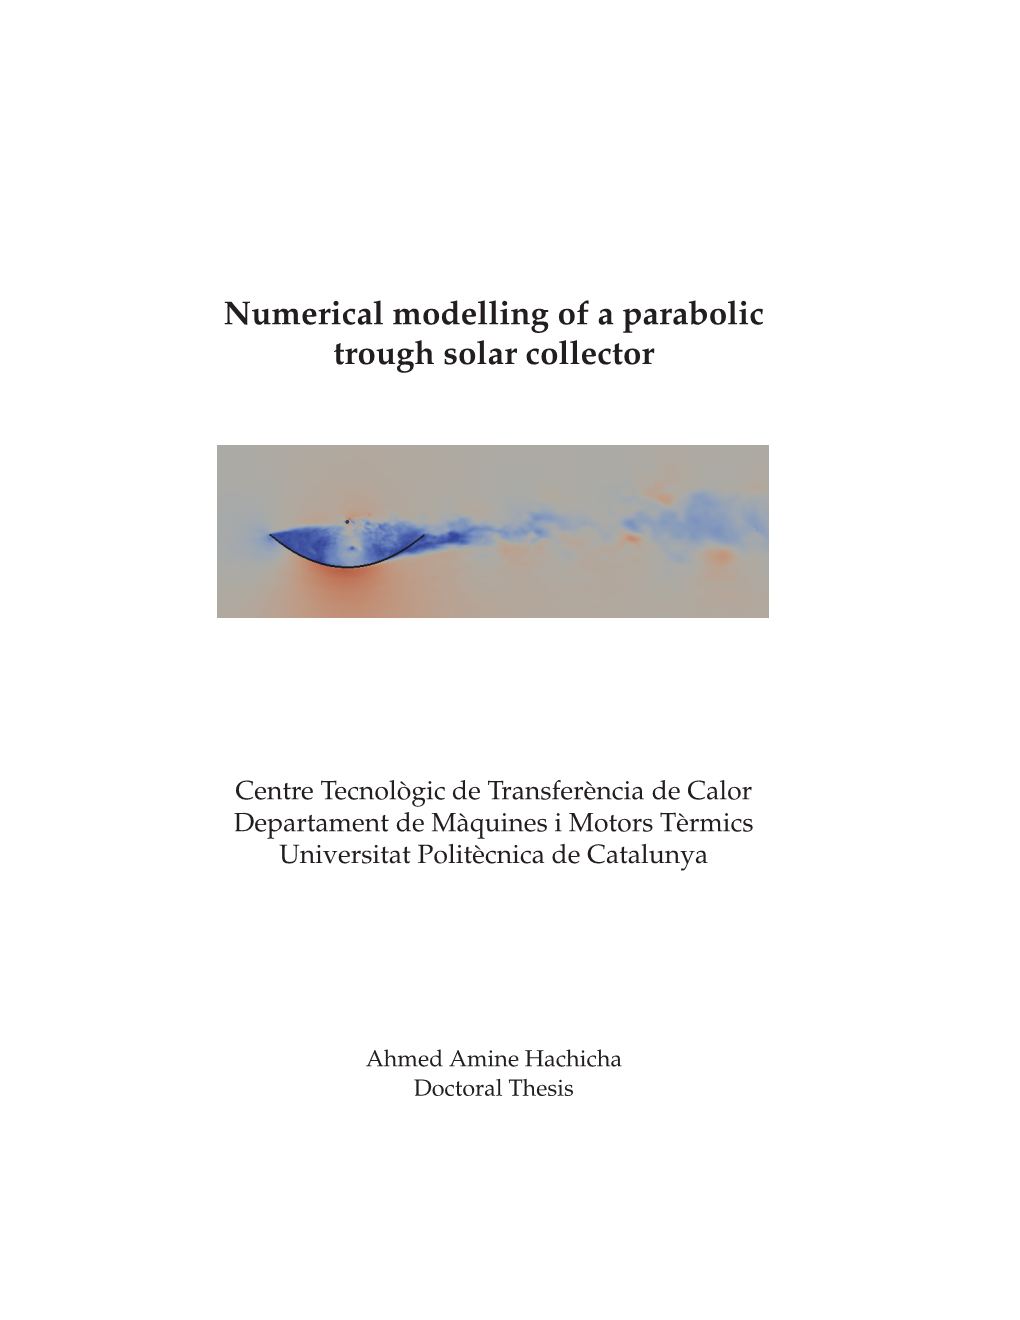 Numerical Modelling of a Parabolic Trough Solar Collector